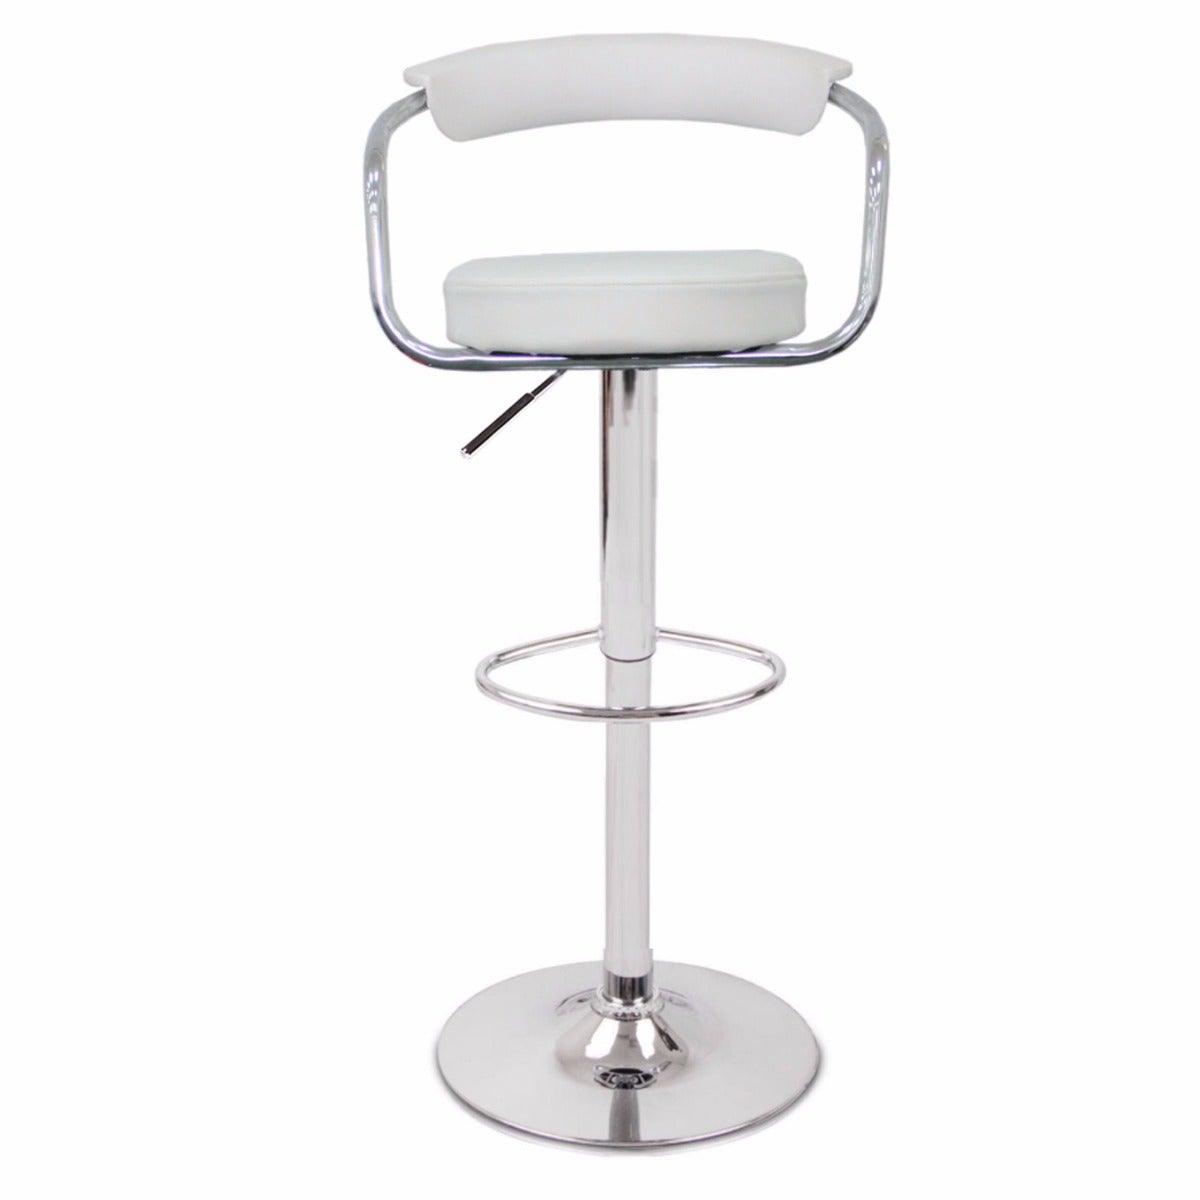 2X White Bar Stools Faux Leather High Back Adjustable Crome Base Gas Lift Swivel Chairs